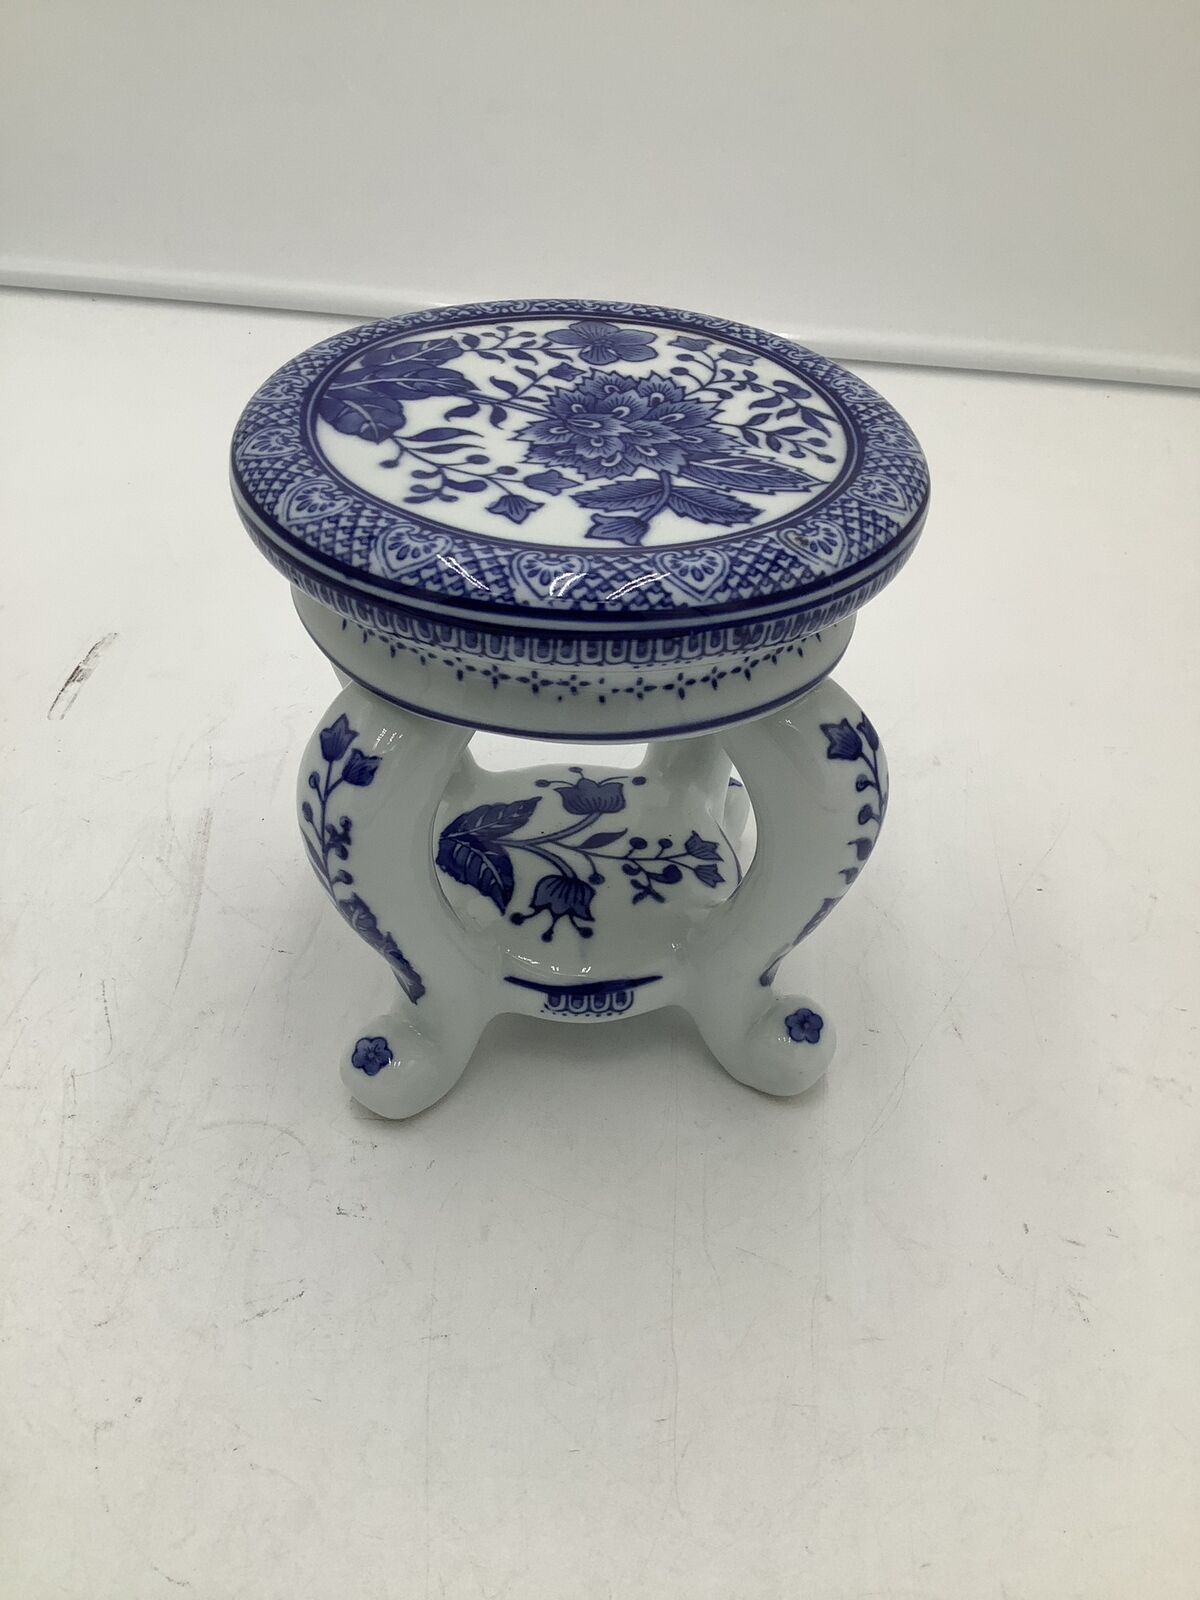 Vintage Formalities Plant Stand Baum Brothers Chinese Blue/White Porcelain 6x6